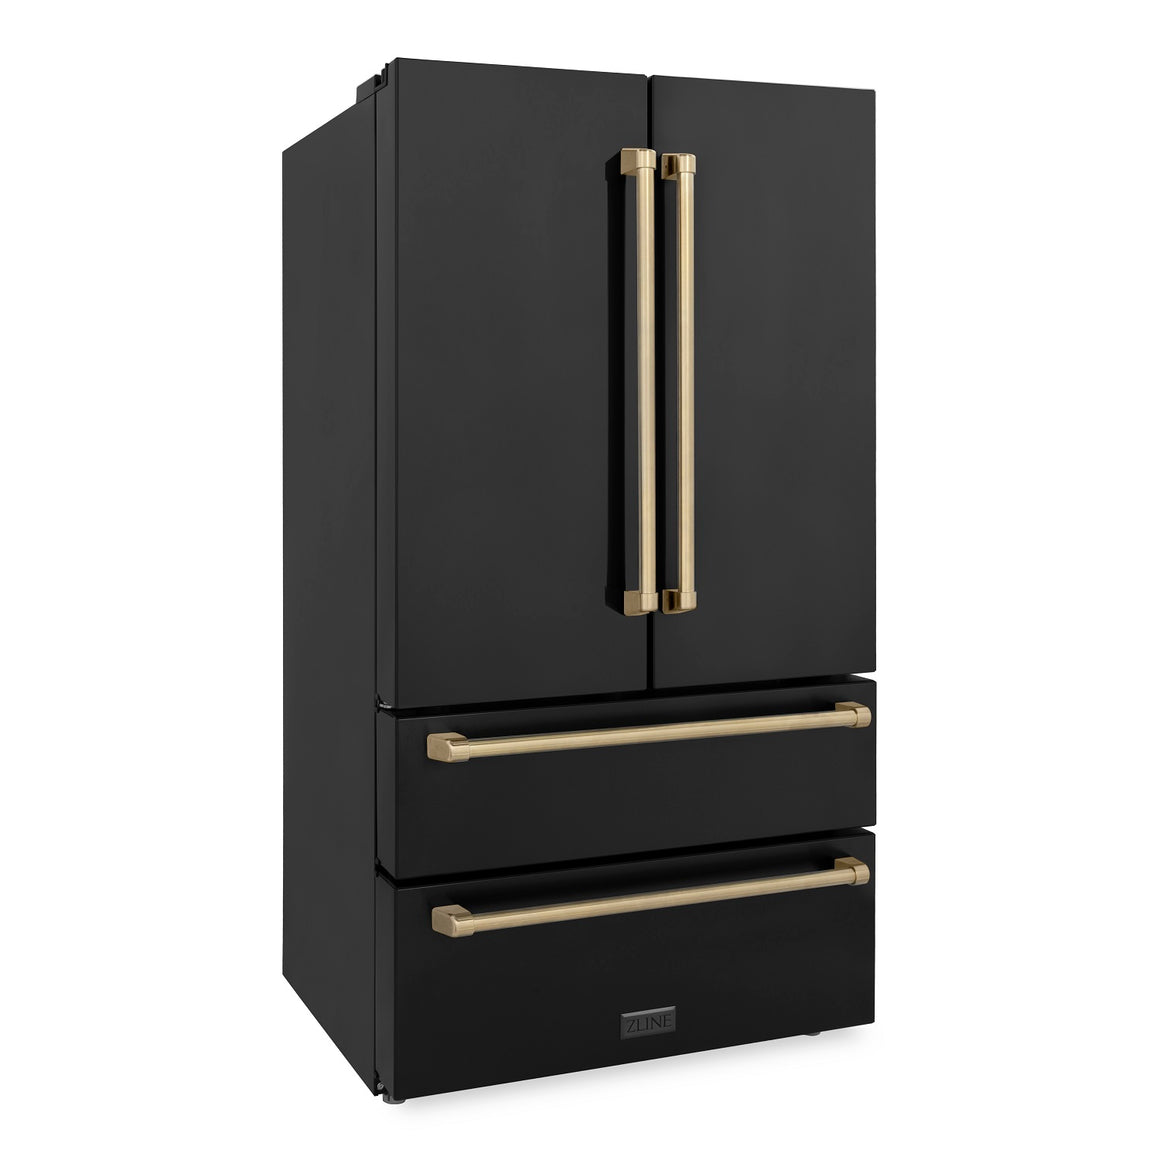 ZLINE 36" Autograph Edition 22.5 cu. ft Freestanding French Door Refrigerator with Ice Maker in Black Stainless Steel with Champagne Bronze Accents